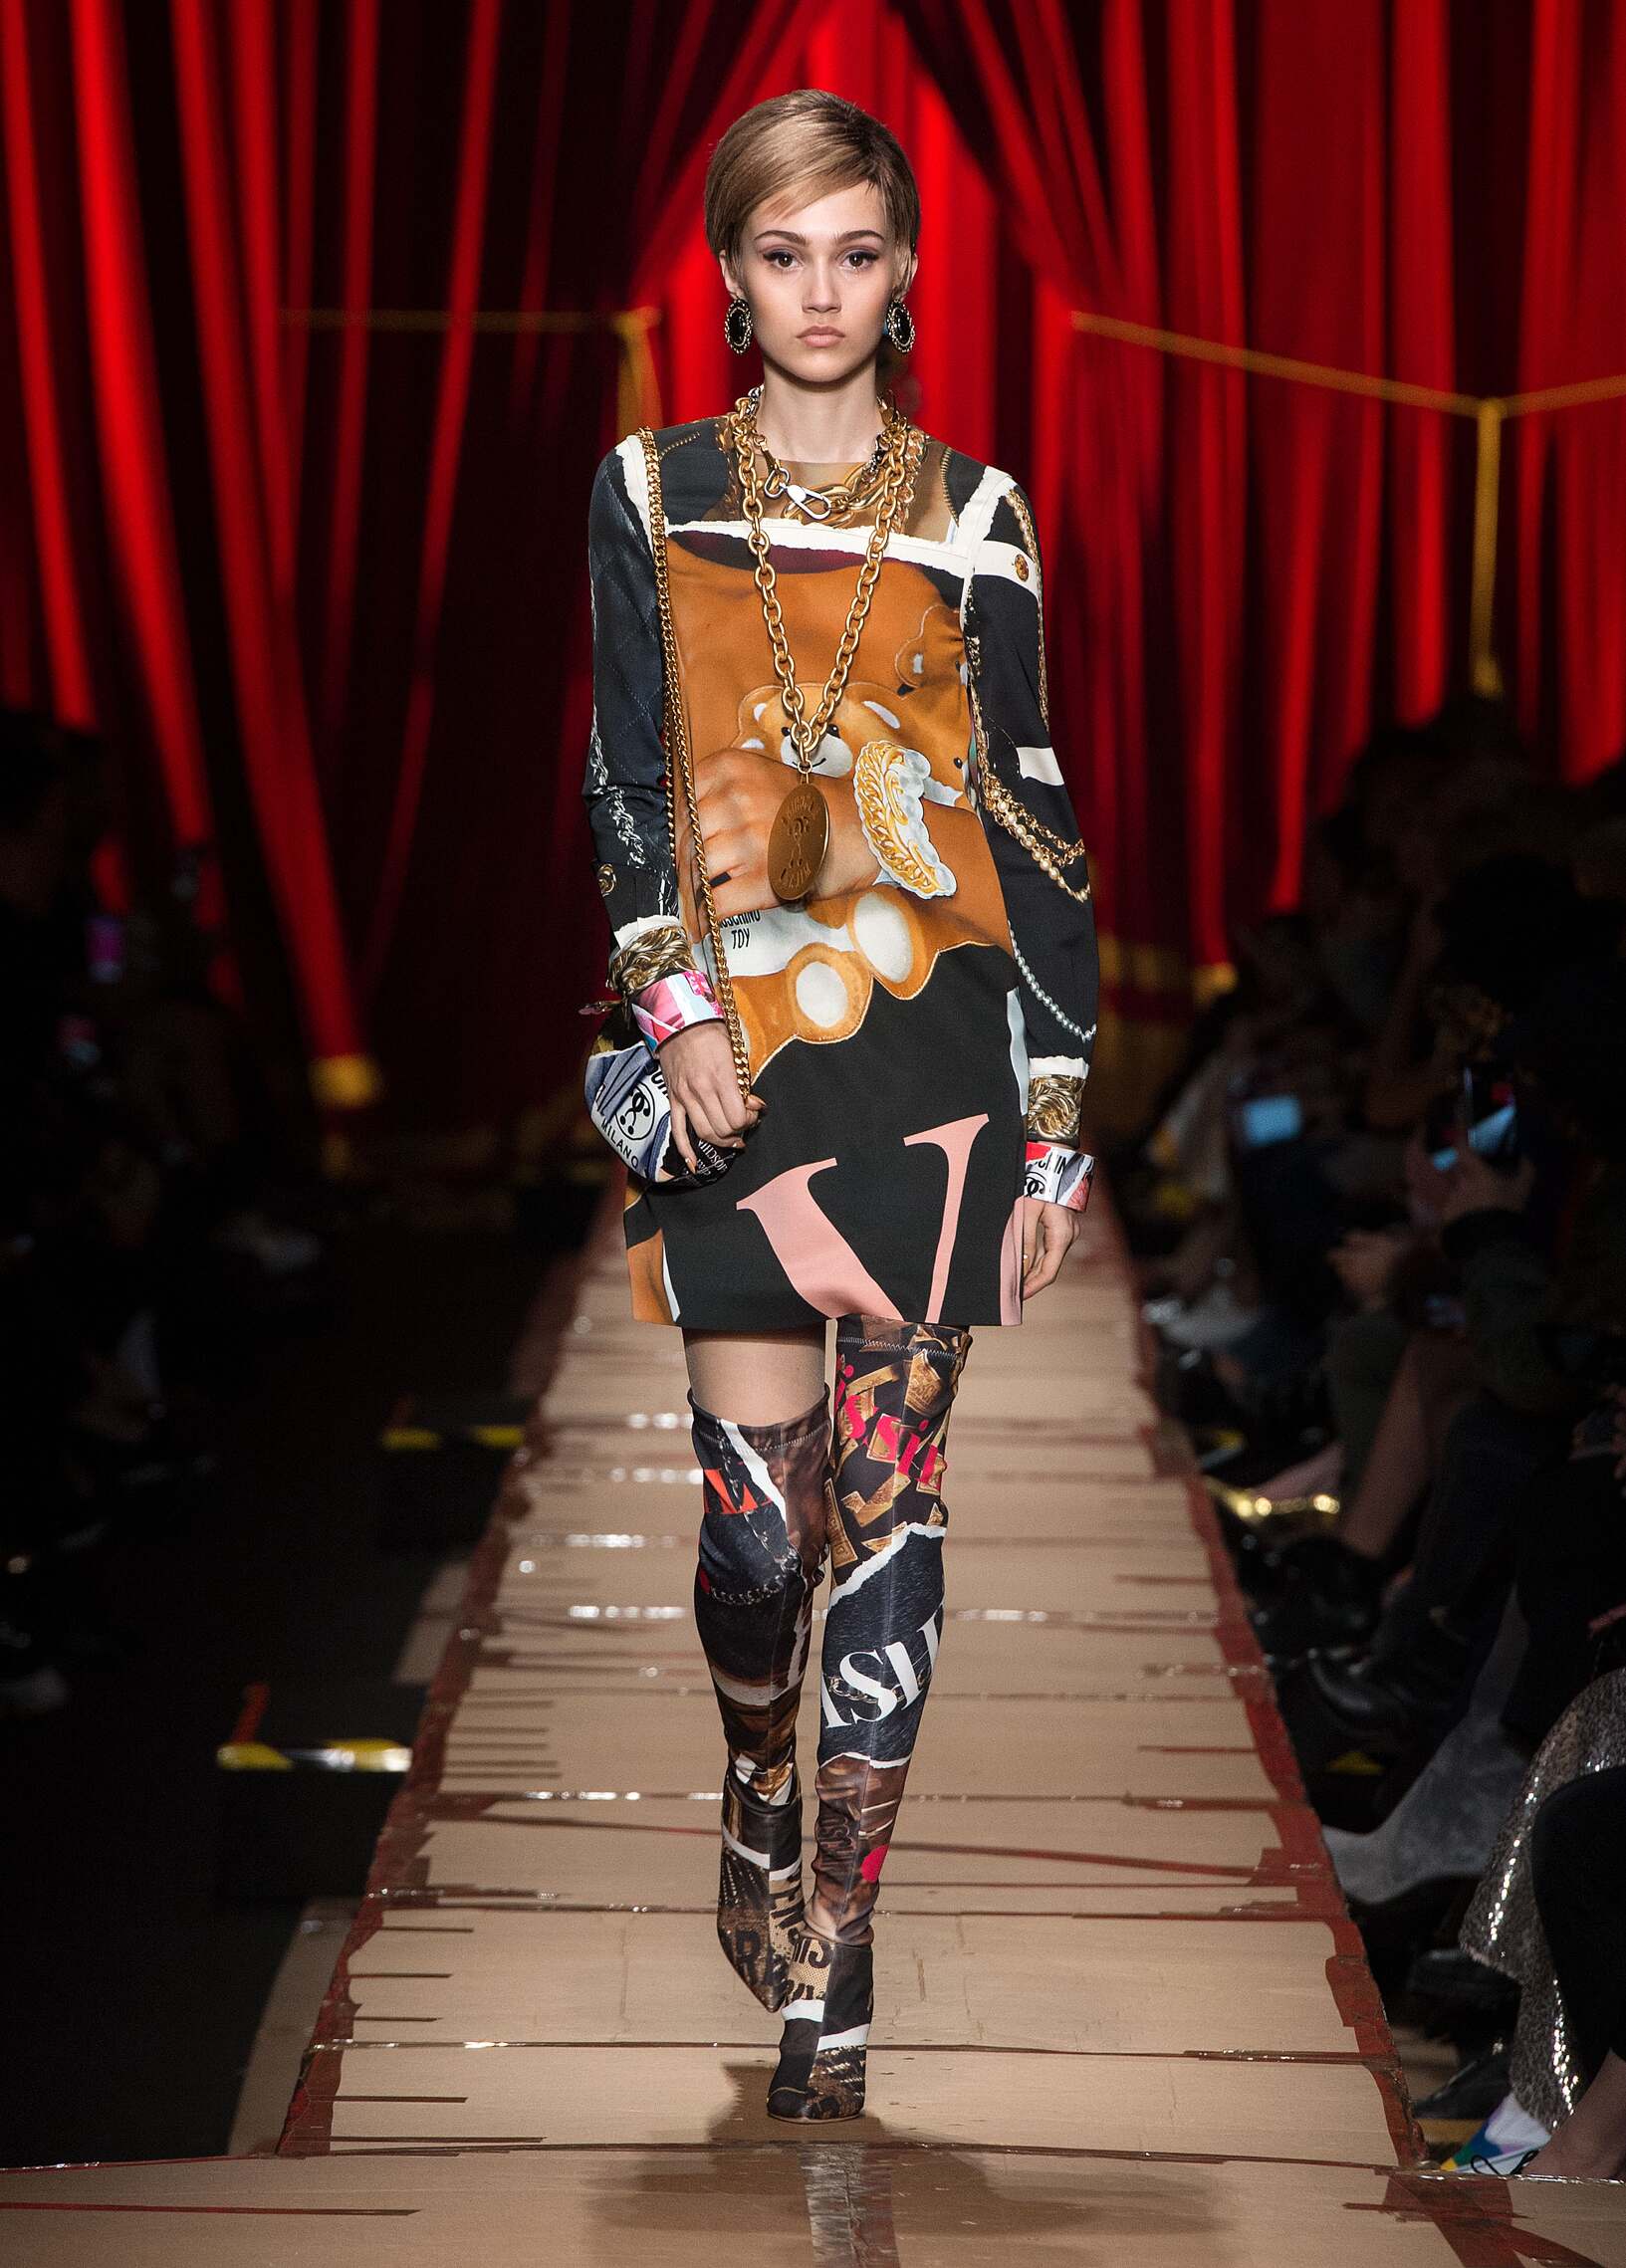 MOSCHINO FALL WINTER 2017-18 WOMEN'S COLLECTION | The Skinny Beep